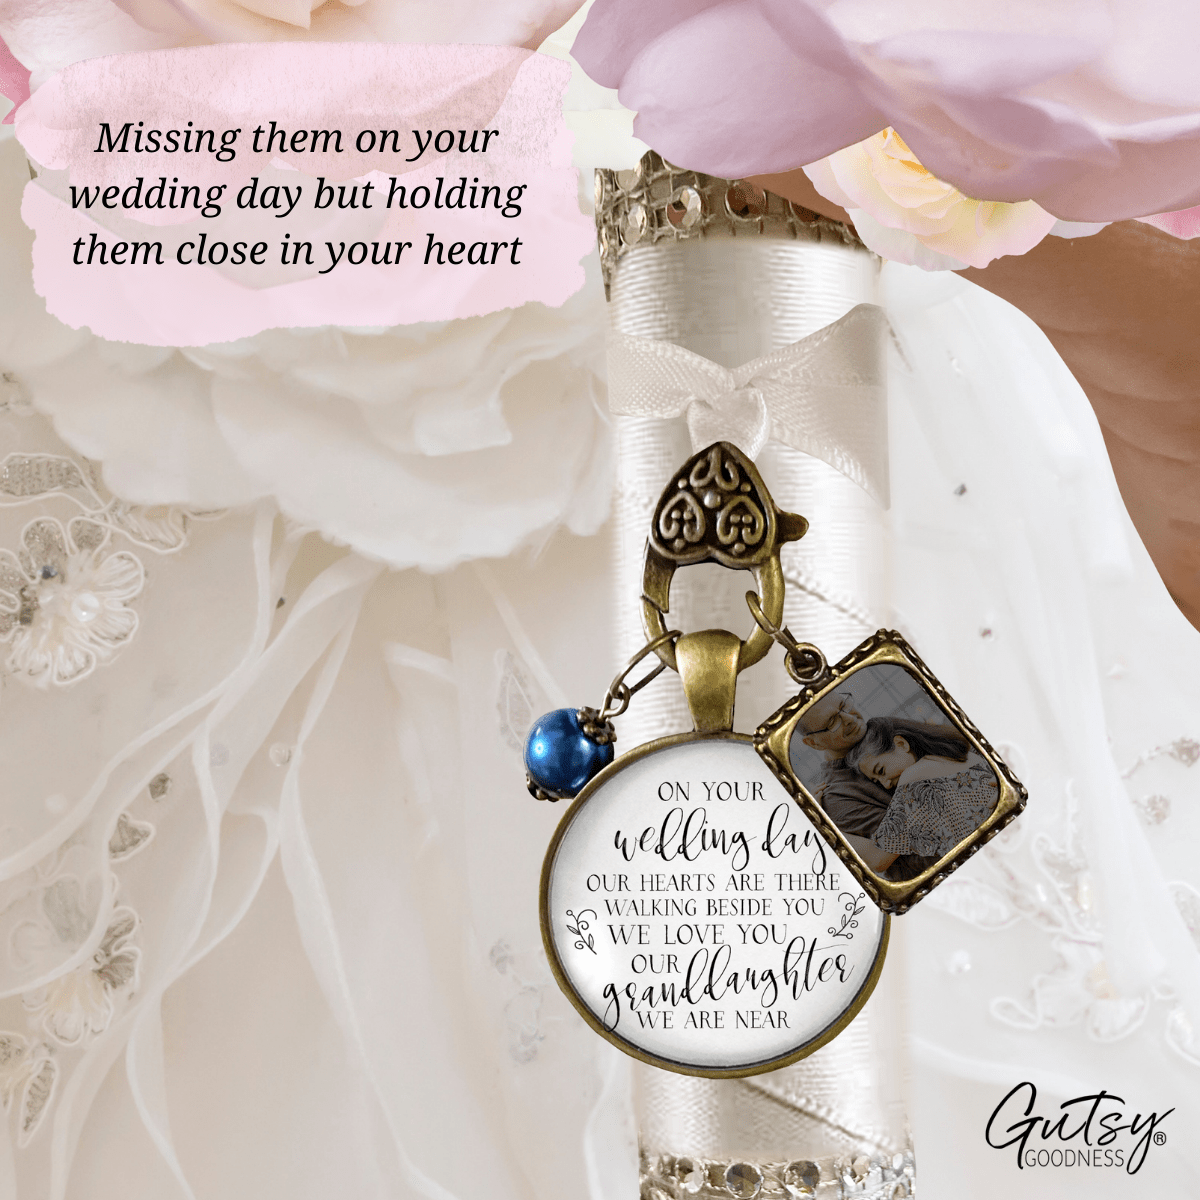 On Your Wedding Day OUR Heart Is There Walking Beside You GRANDDAUGHTER | DESTINATION BRONZE - WHITE - BLUE BEAD